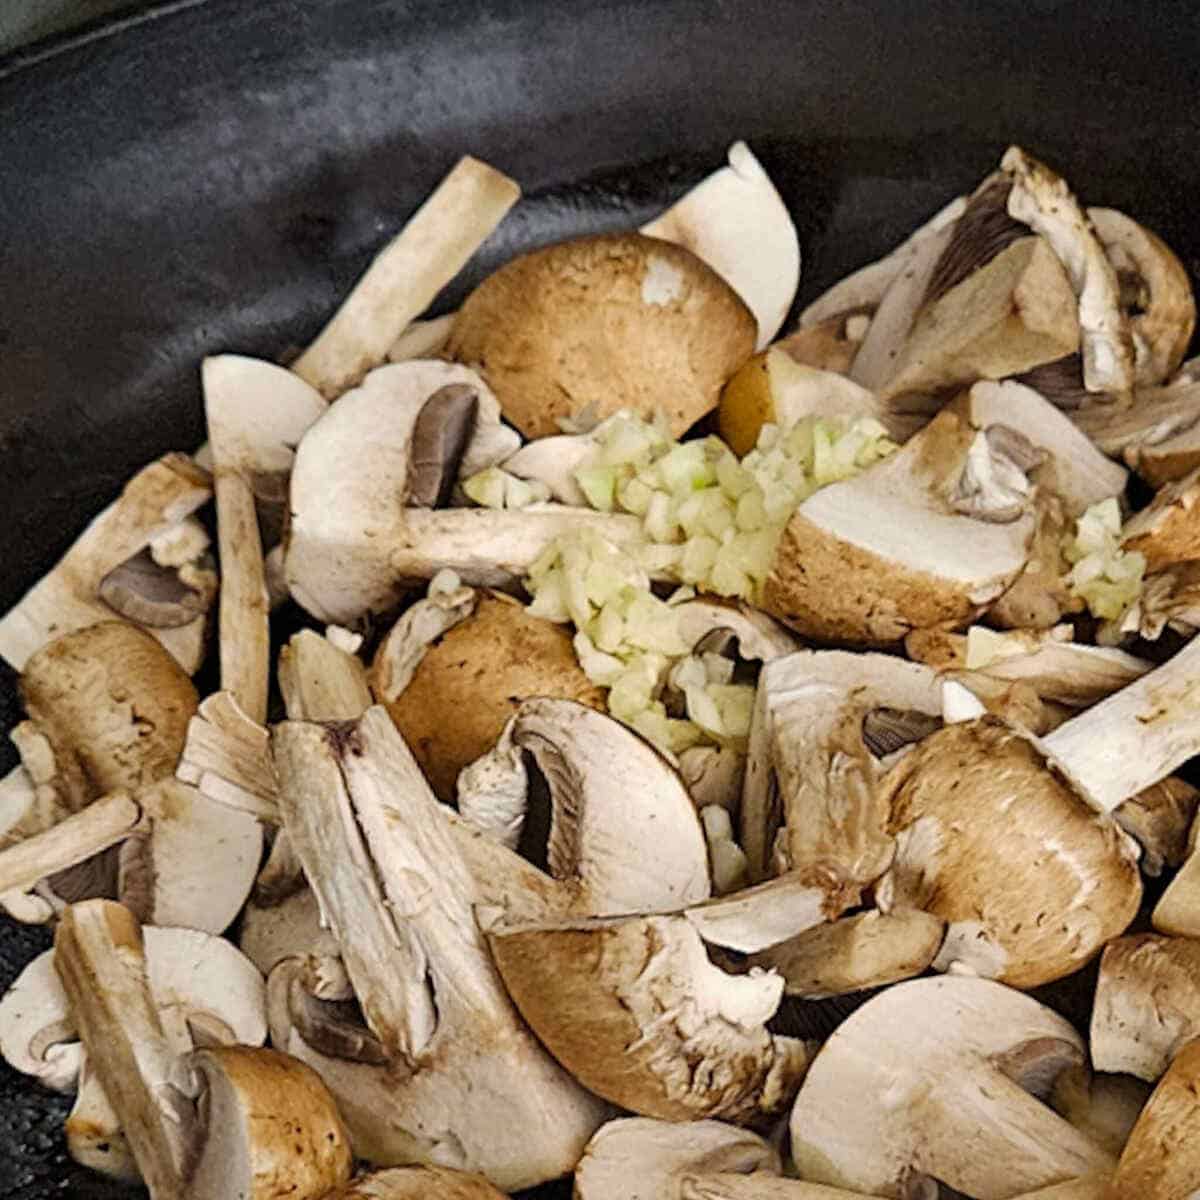 adding chopped garlic to a pan of mushrooms cooking for the pasta carbonara with mushrooms